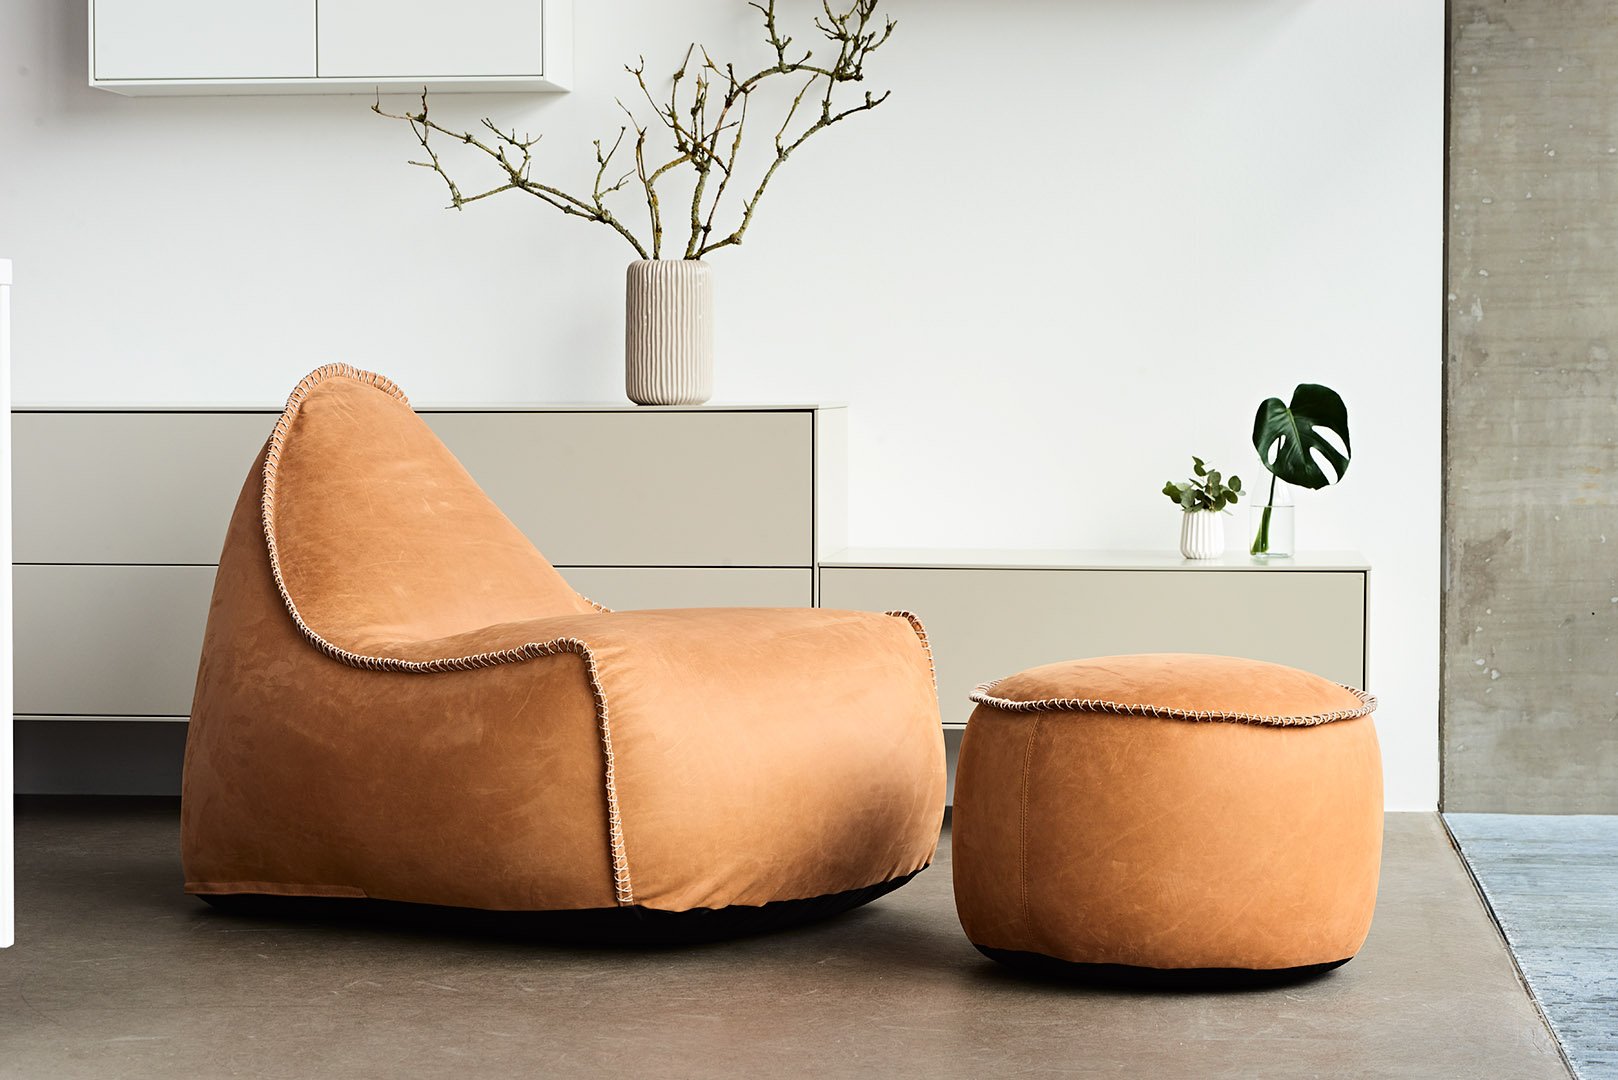 BEON.COM.AU RETROit in exclusive leather RETROit Dunes gives you the well-known comfort of the RETROit chair combined with a beautiful natural leather of the finest quality. RETROit Dunes is a lounge chair with unique Danish design that compliments your home with warmth and edgy details – nice!The high-quali... Sackit Australia at BEON.COM.AU